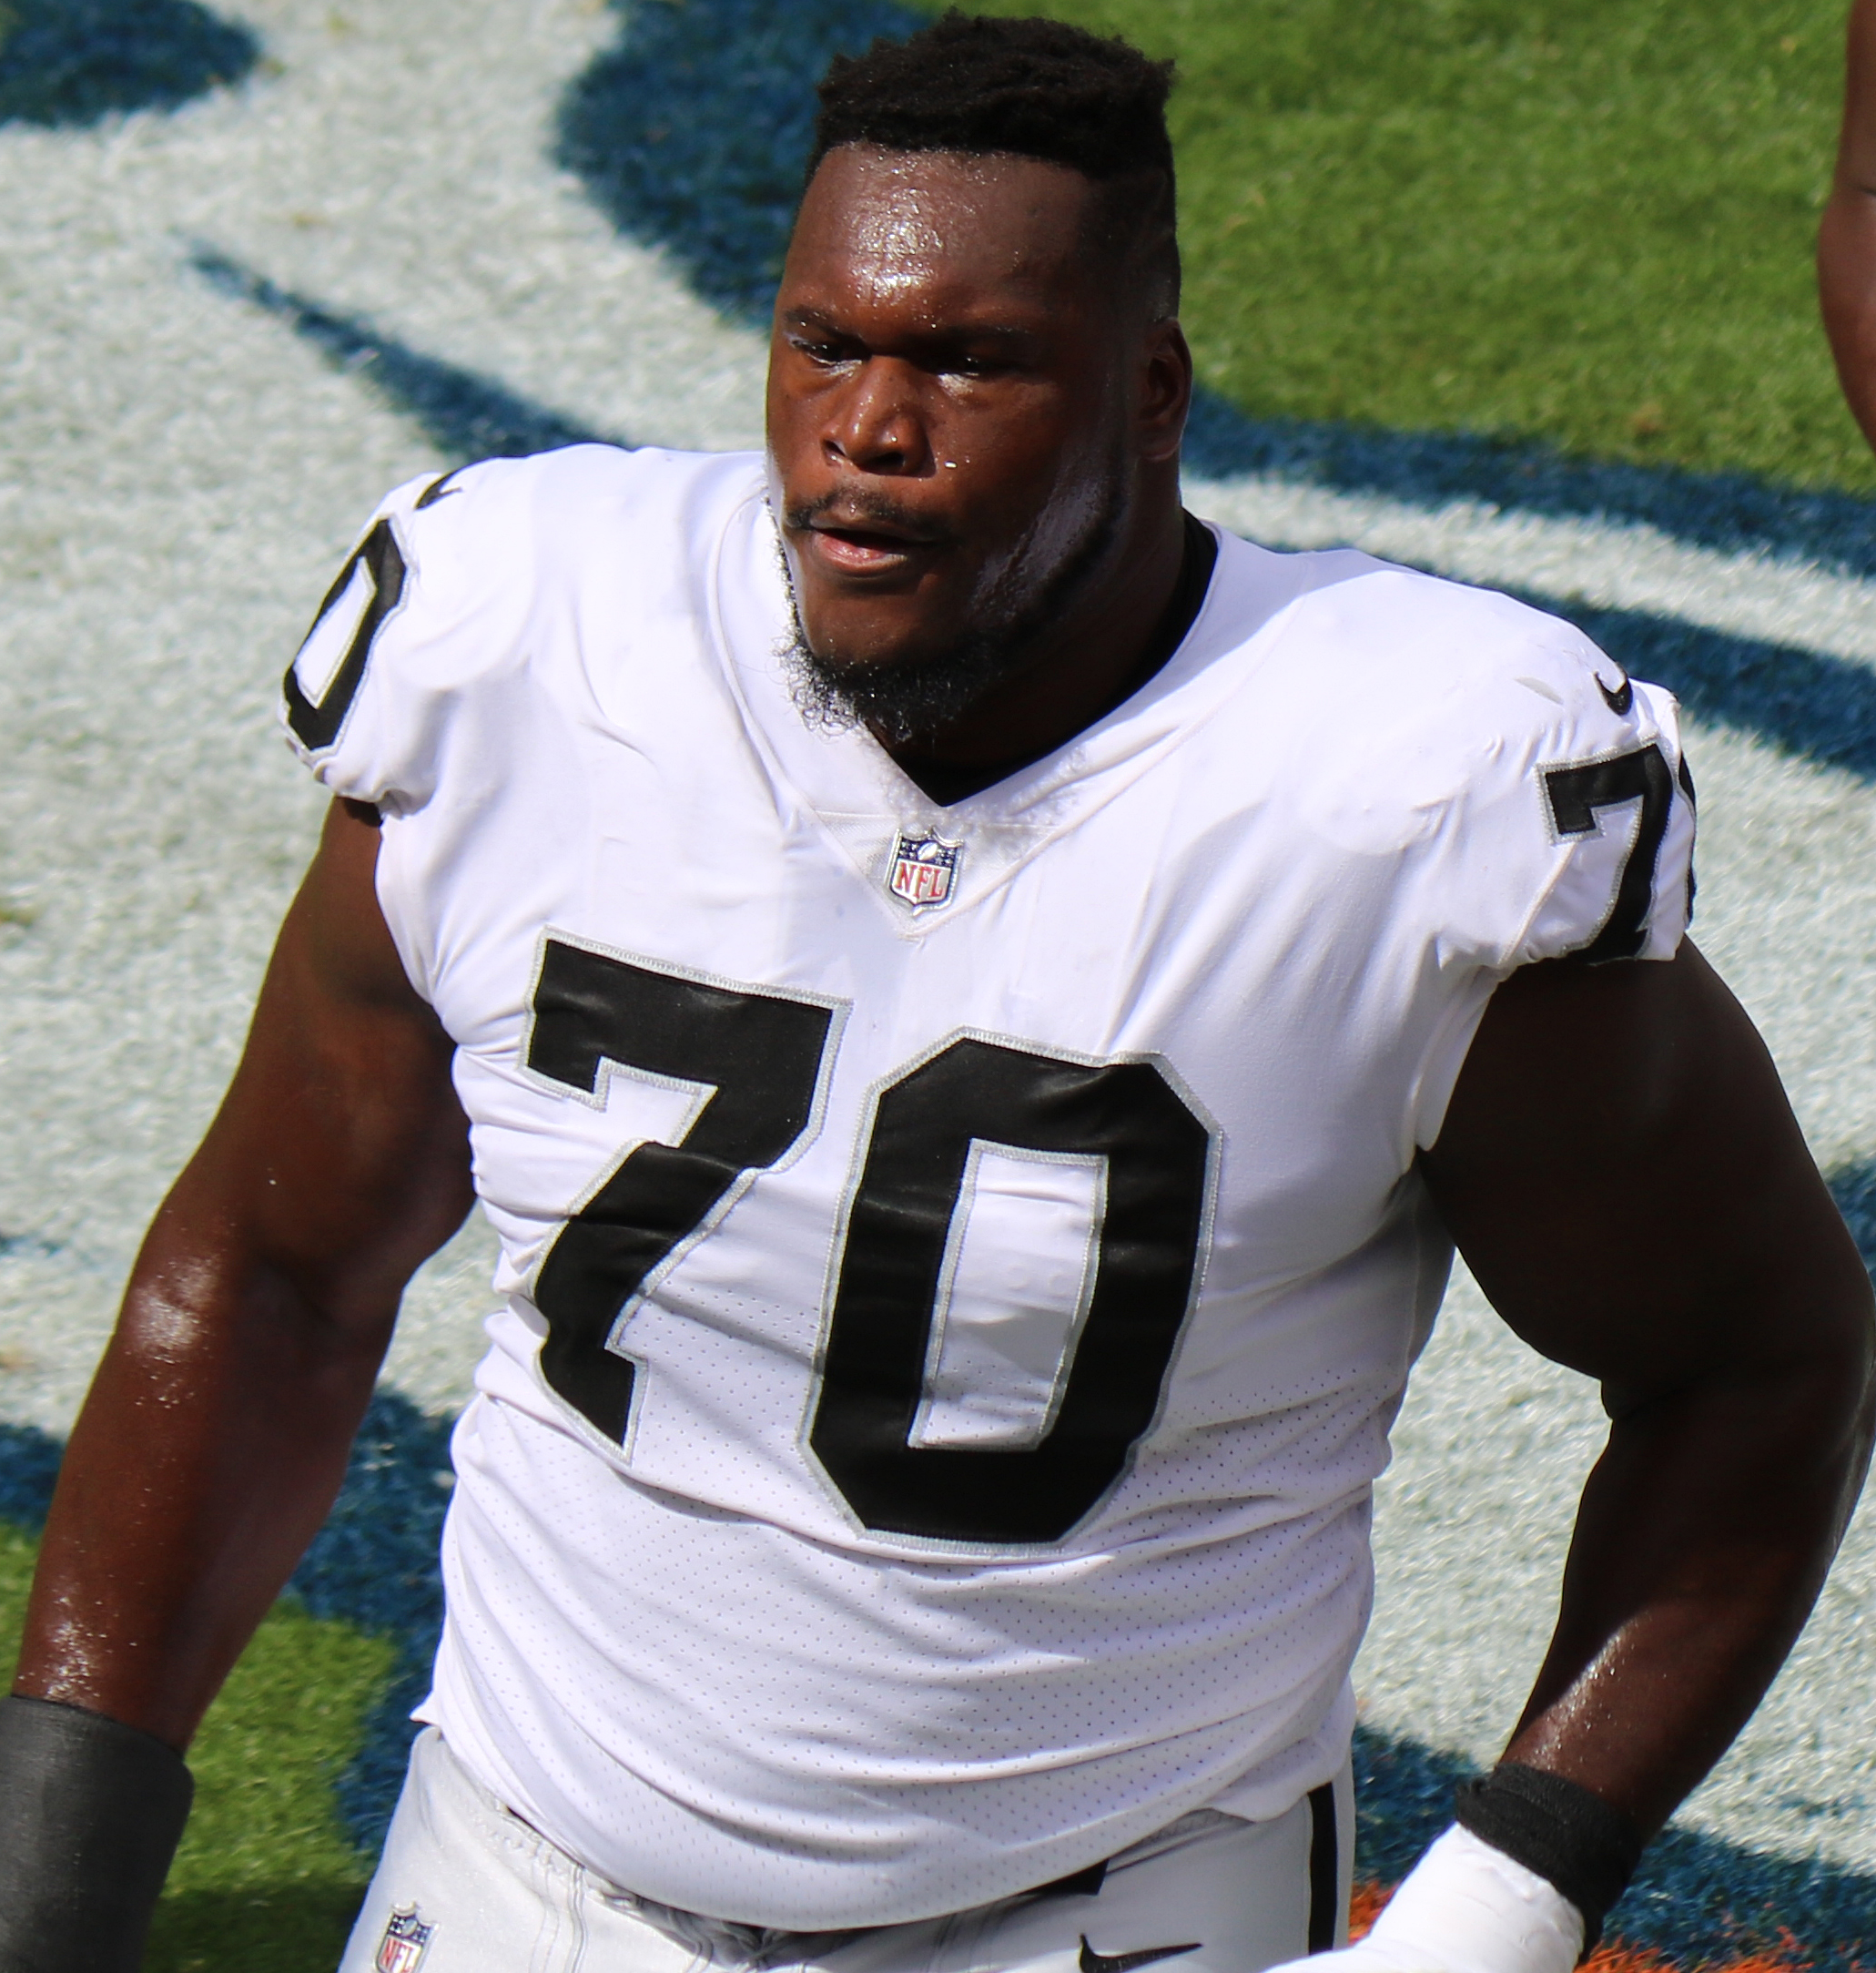 Reports: Jets, G Osemele in dispute over shoulder injury